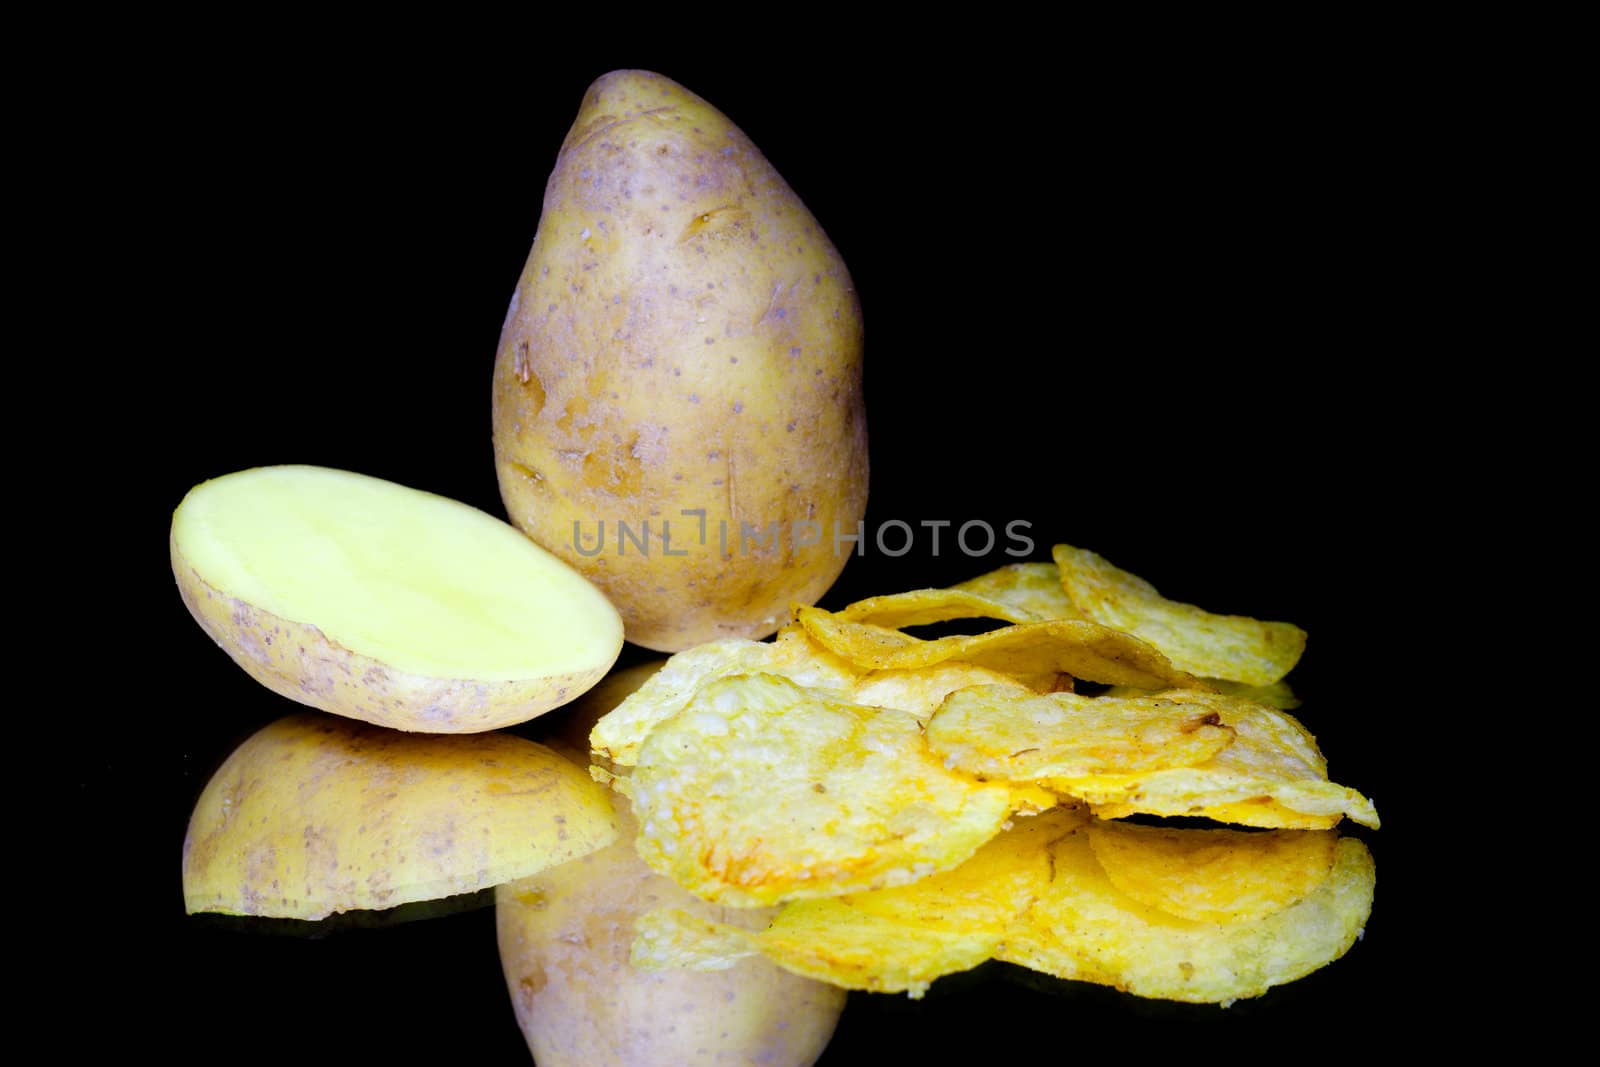 Potato and chips isolated on black background
